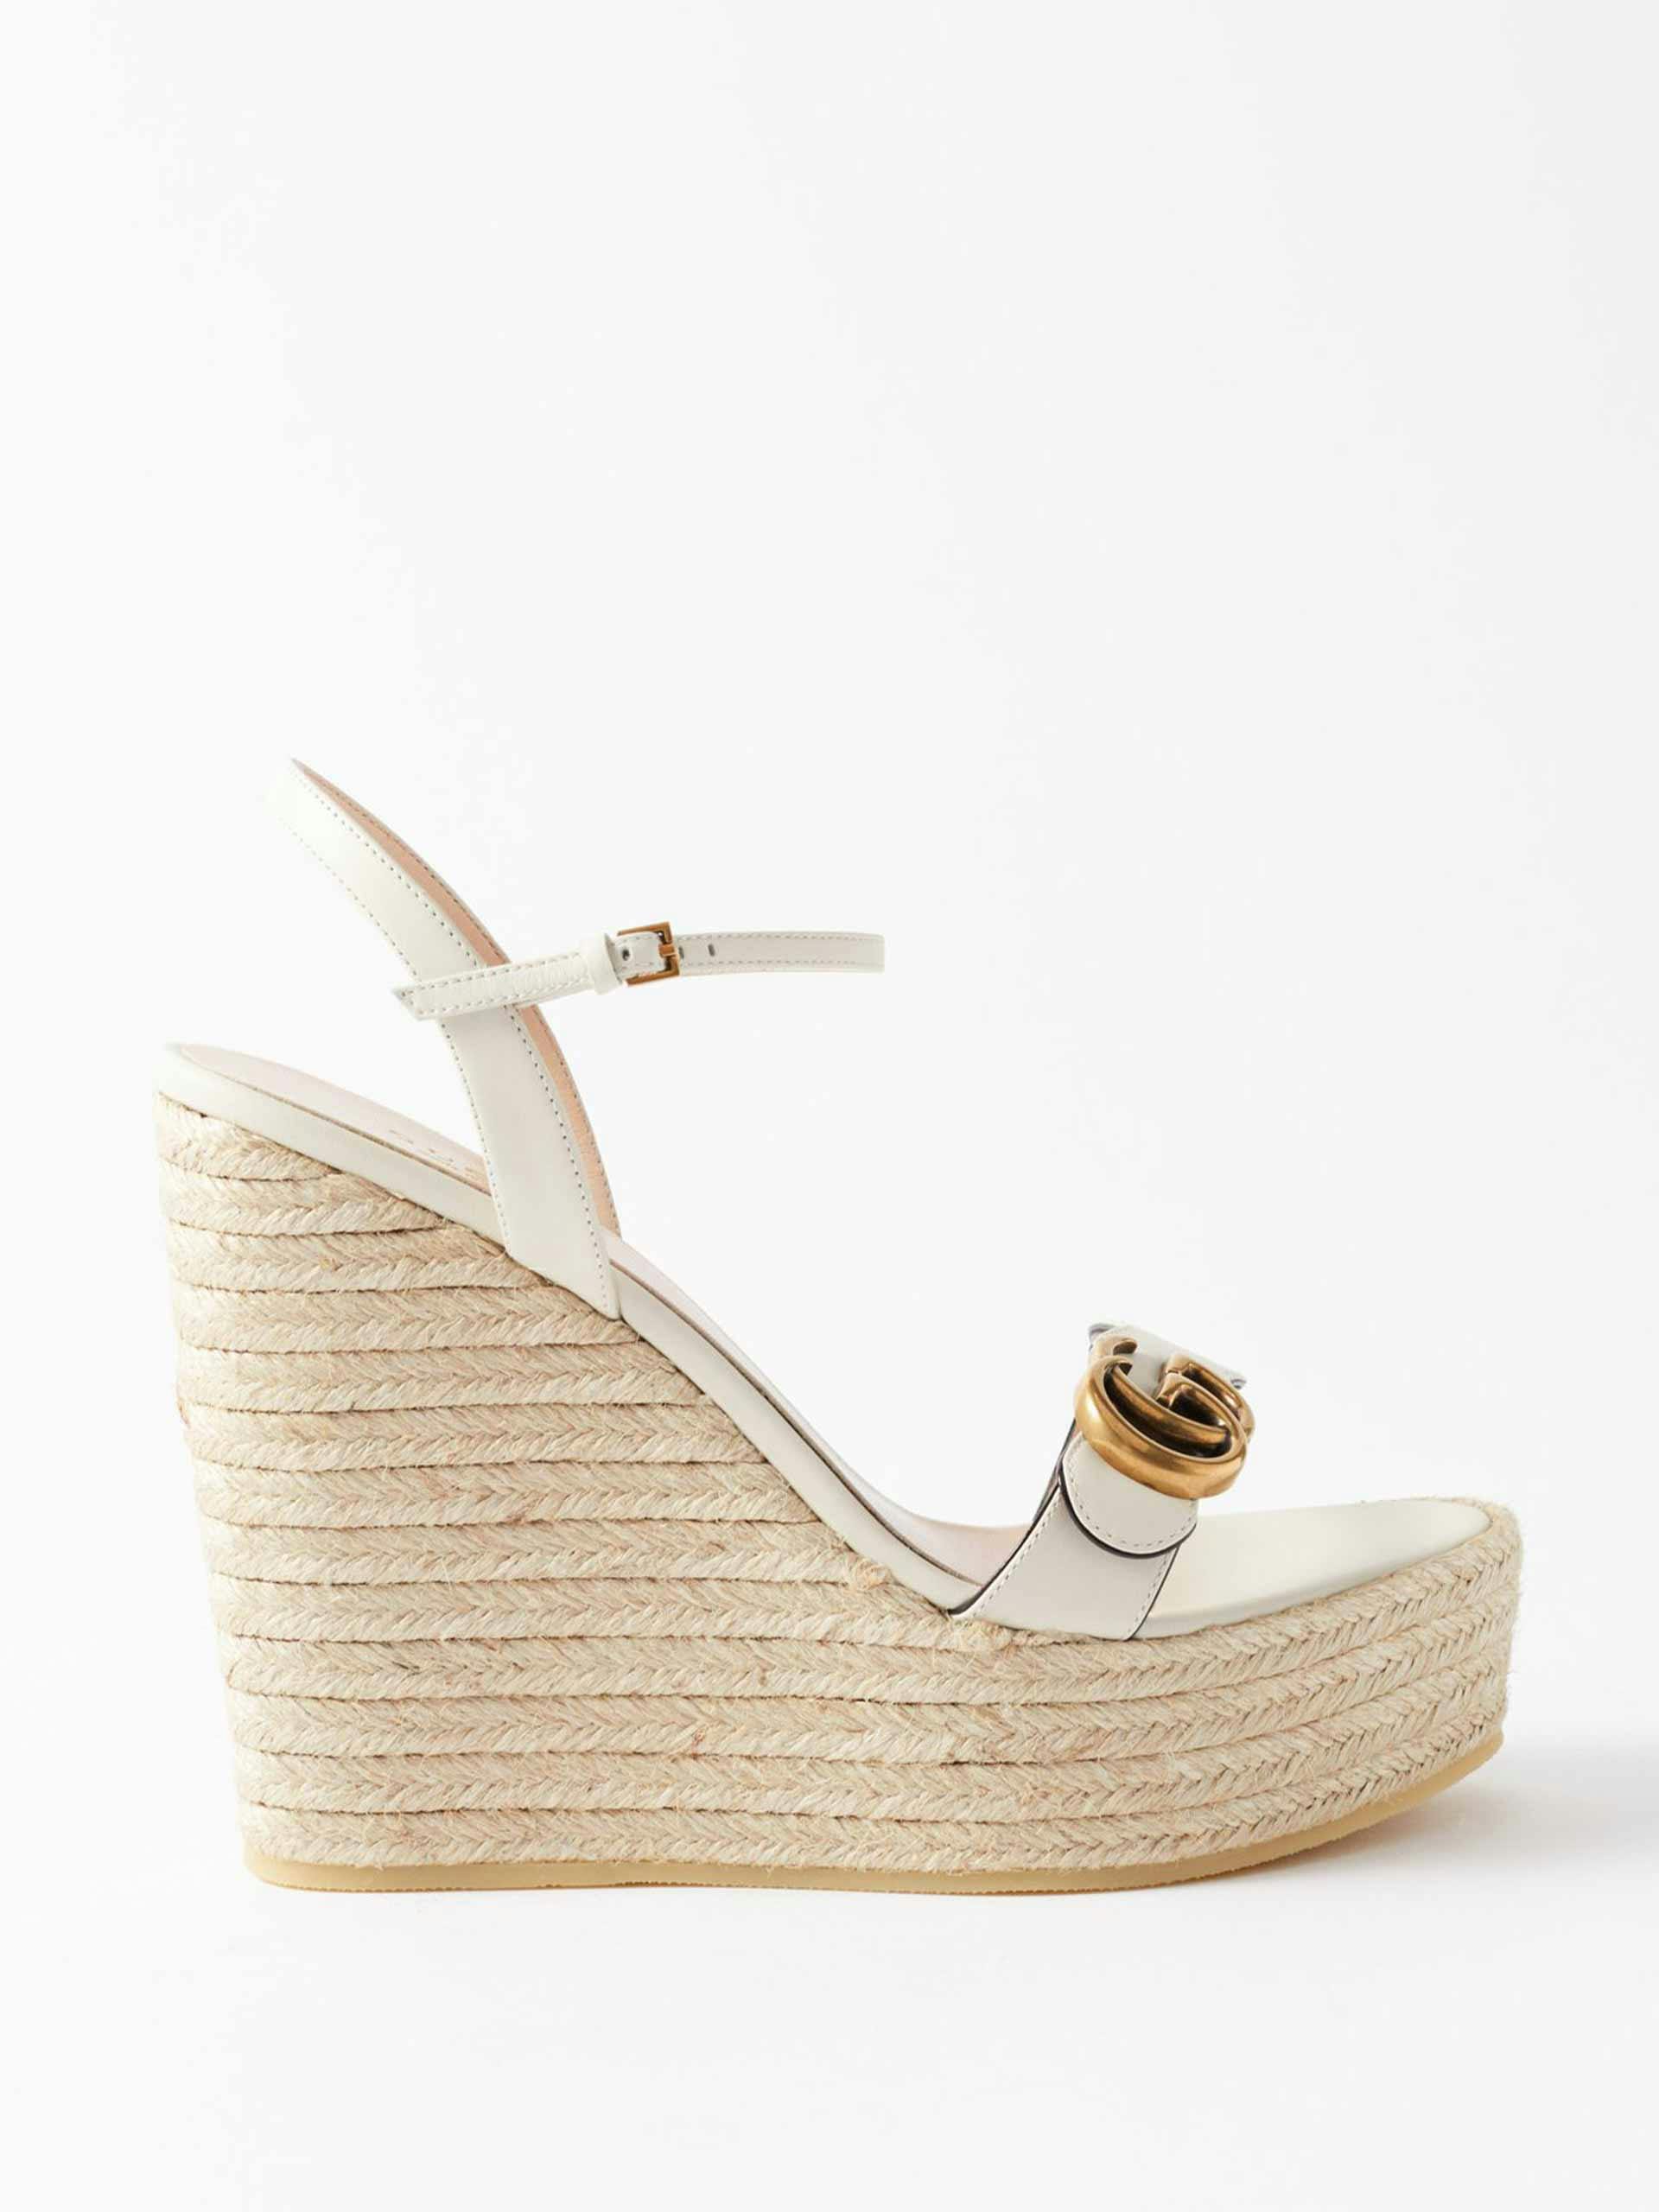 White leather espadrille wedge sandals